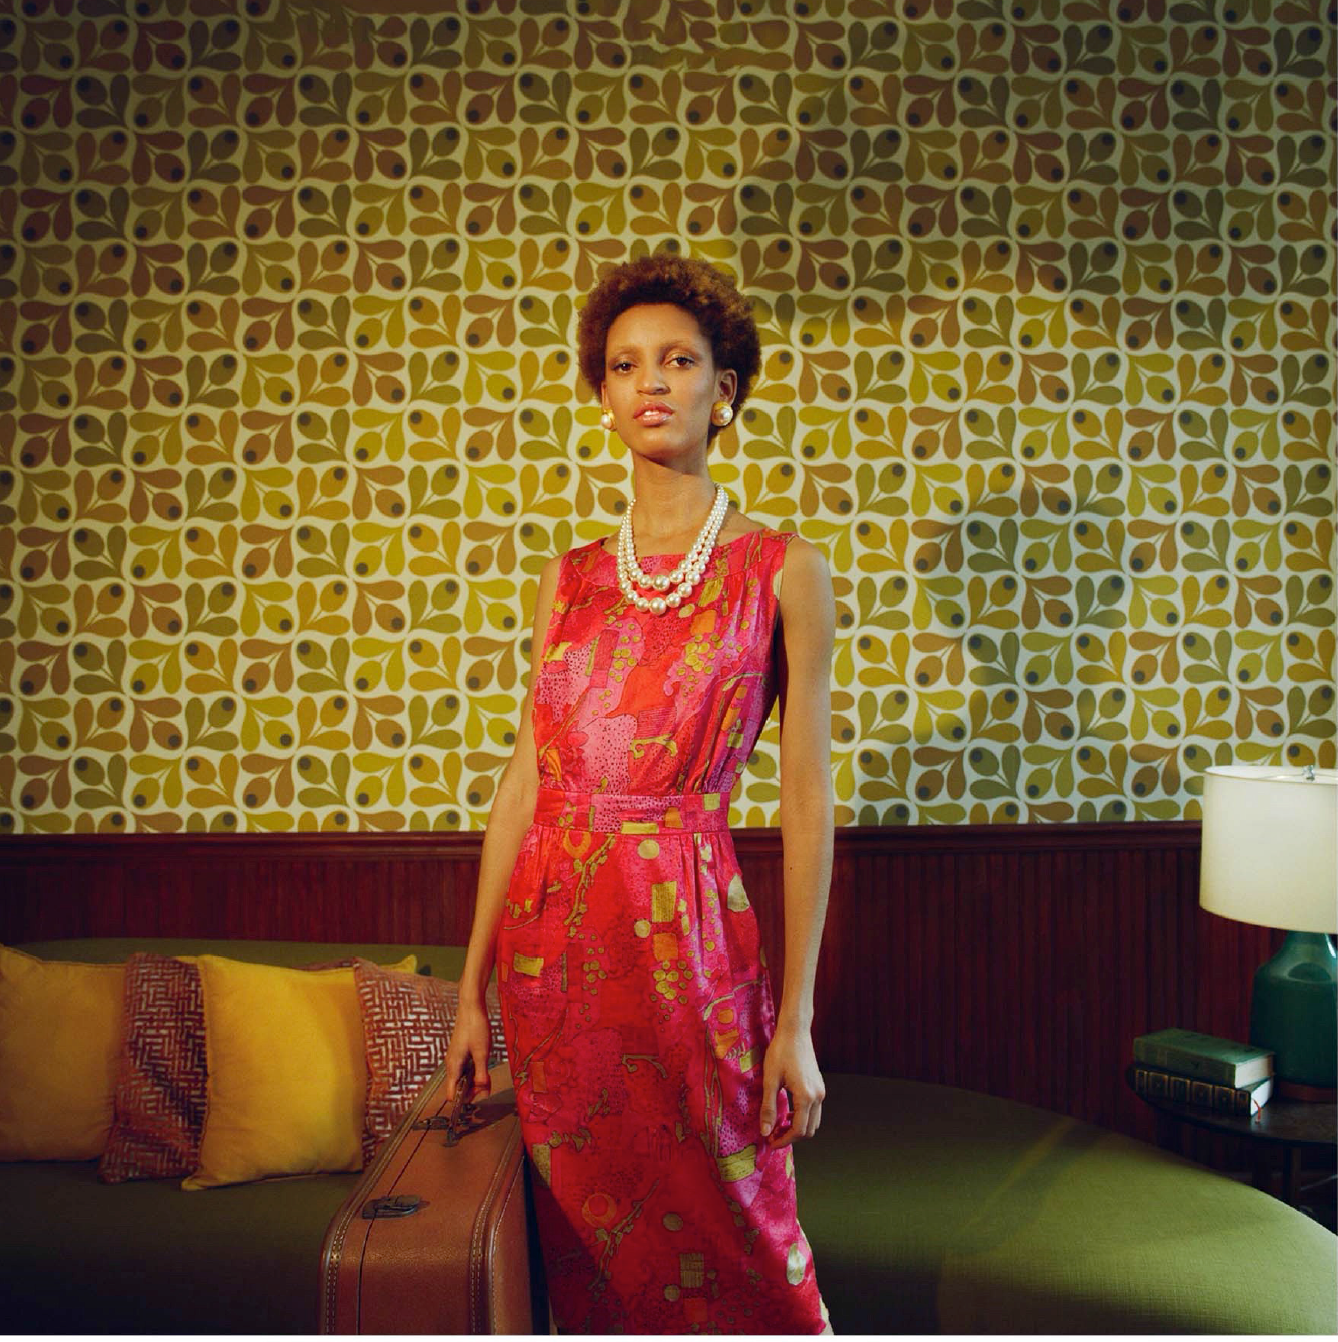 This image shows a woman with a curly pixie haircut, gold stud earrings, a white pearl necklace, and a pinkish red patterned dress. The model is also holding a brown suitcase. The background of the image is a green patterned wallpaper, and a wall couch with green cushions, yellow and orange pillows, and a side table with a lamp.